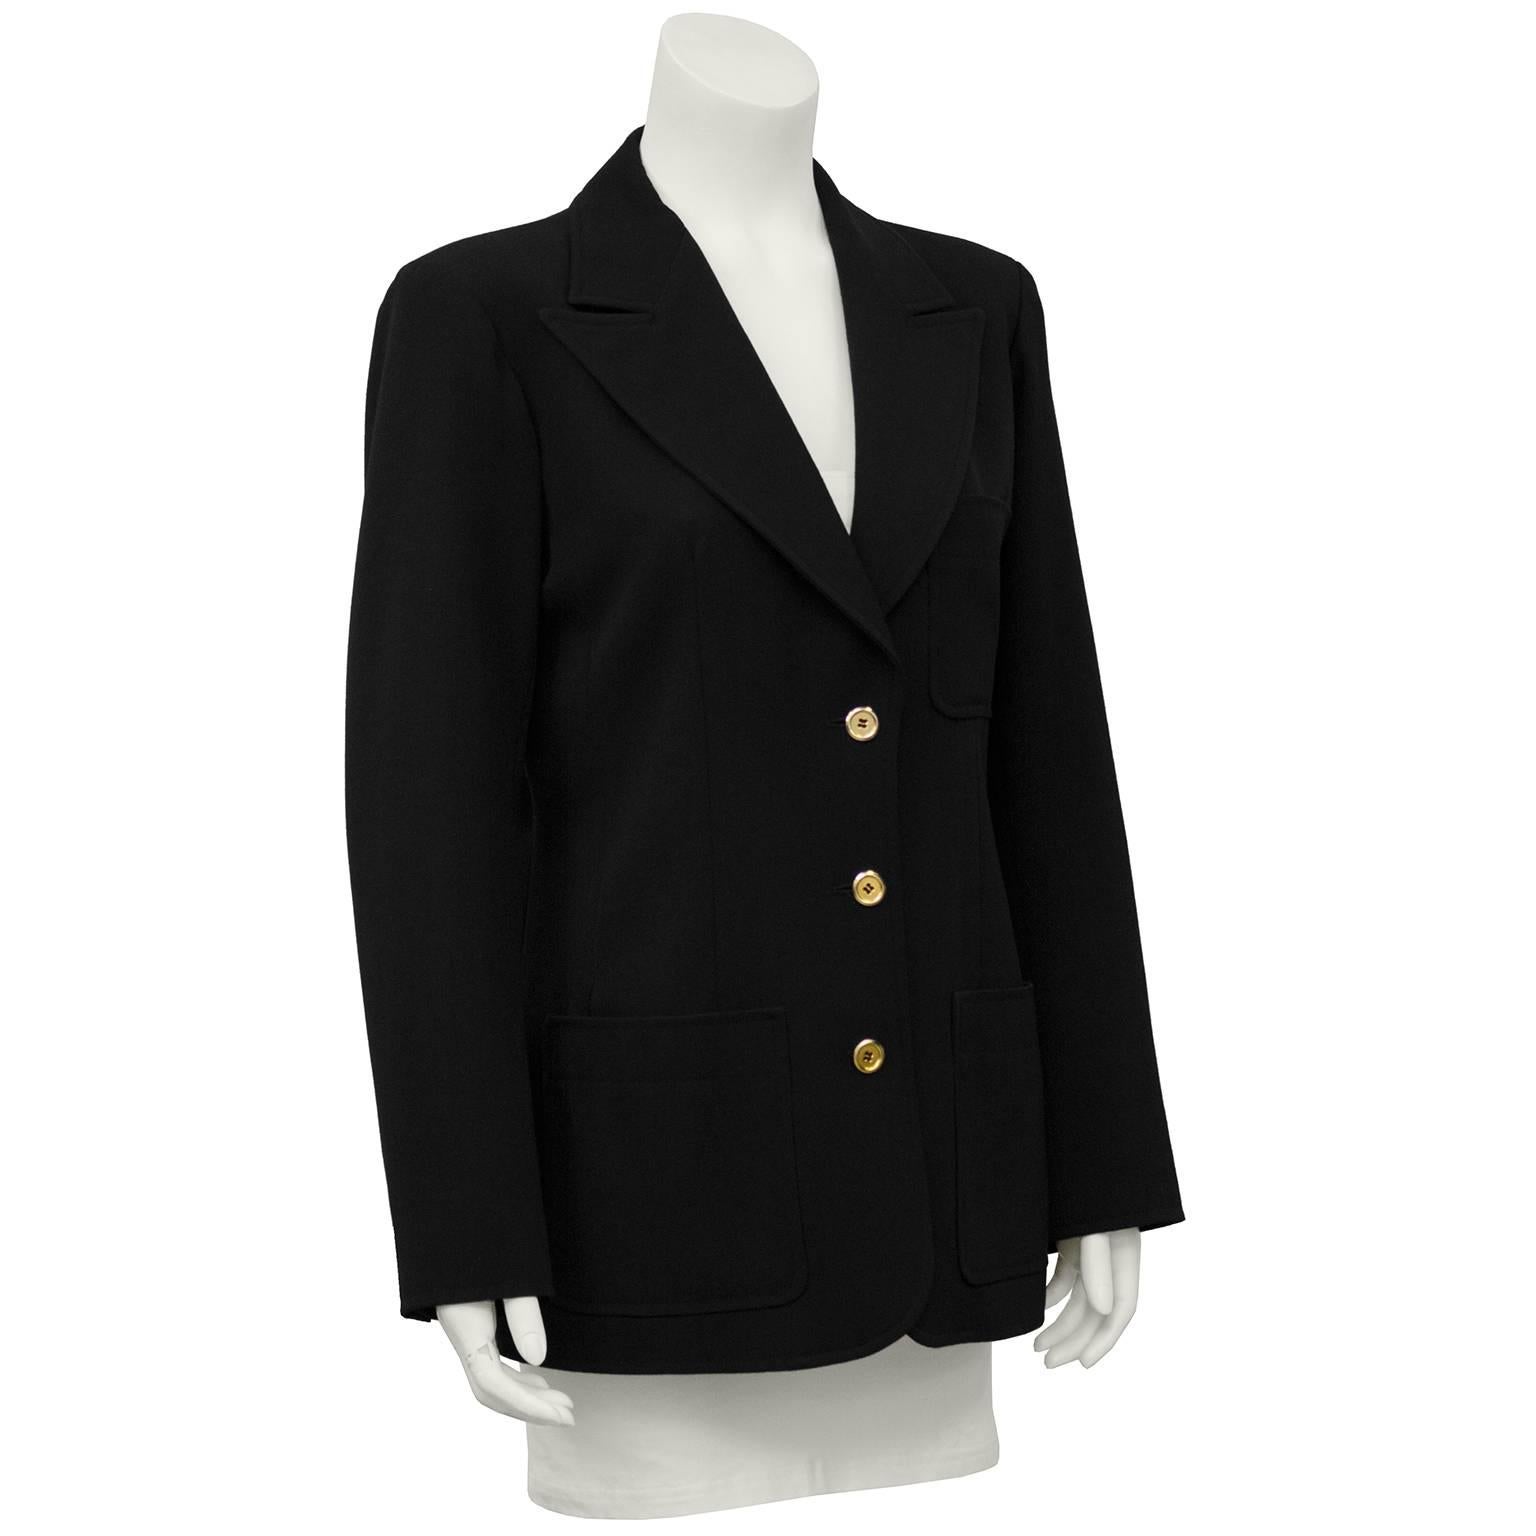 1970's Saint Laurent black gaberdine blazer. Small patch pocket at bust and 2 patch pockets at hips, 3 gold buttons. Classic and elegant, a piece you reach to wear again and again. Excellent vintage condition. Marked FR 44, fits like a US 6.